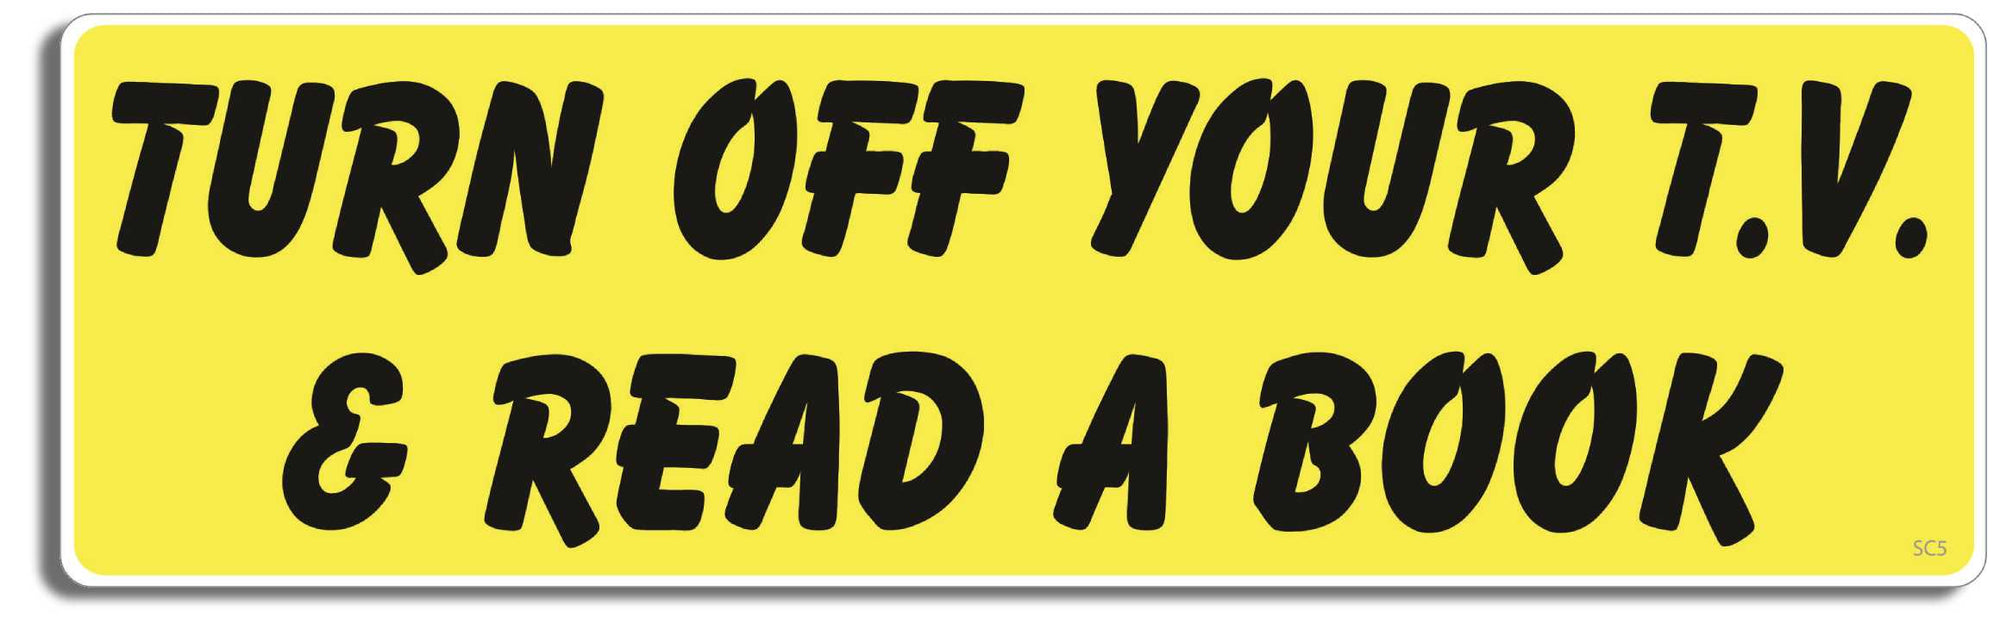 Turn off your TV and read a book - 3" x 10" Bumper Sticker--Car Magnet- -  Decal Bumper Sticker-political Bumper Sticker Car Magnet Turn off your TV and read a book-  Decal for carsconservative, liberal, Political